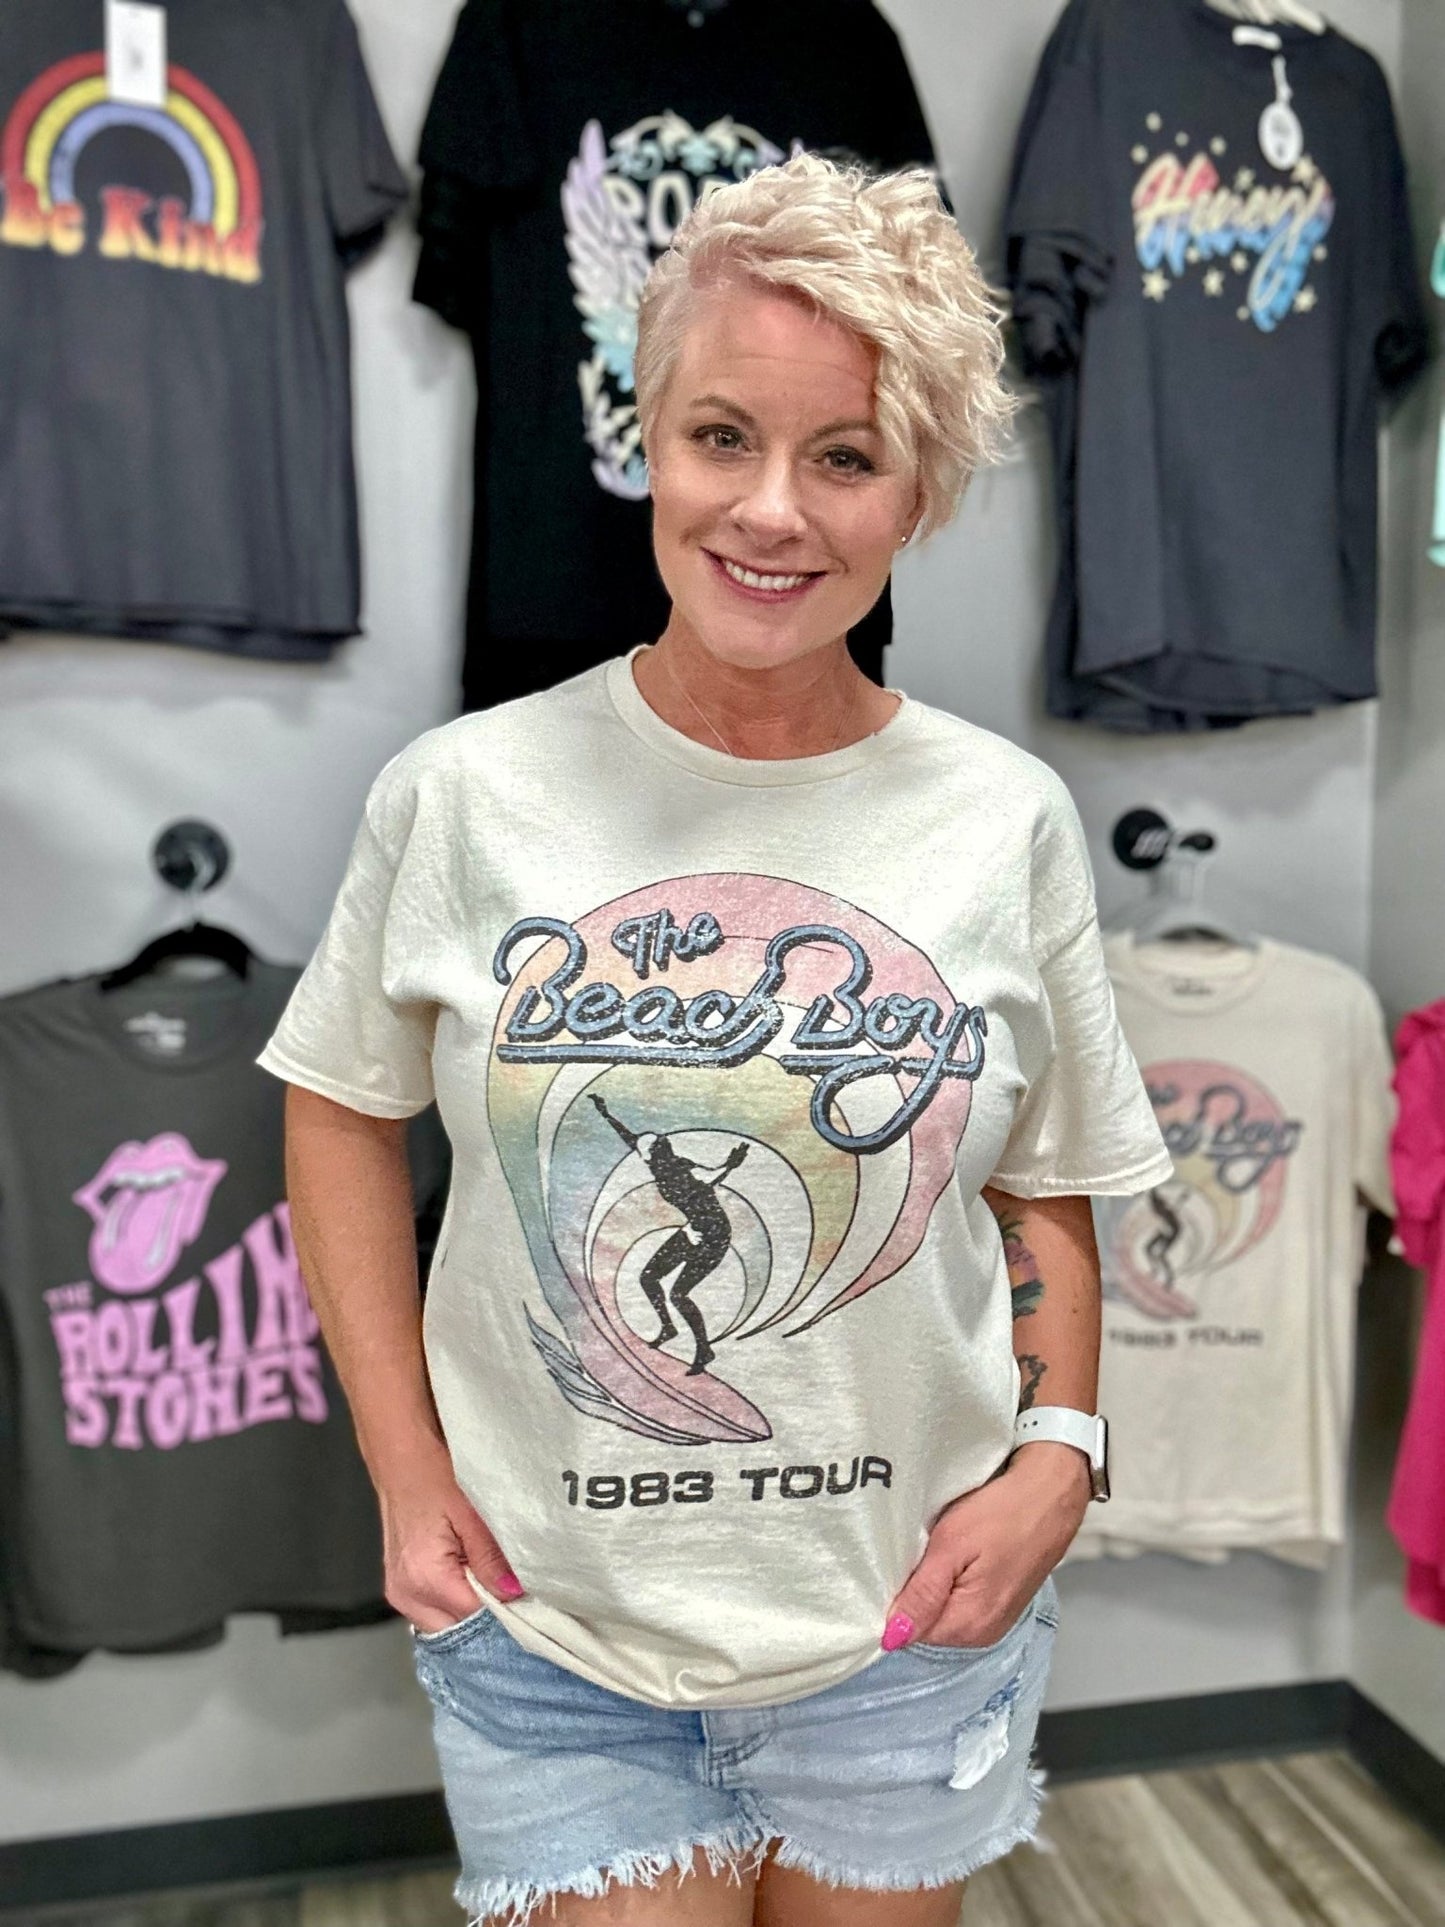 The Beach Boys Graphic Tee - Polished Boutique